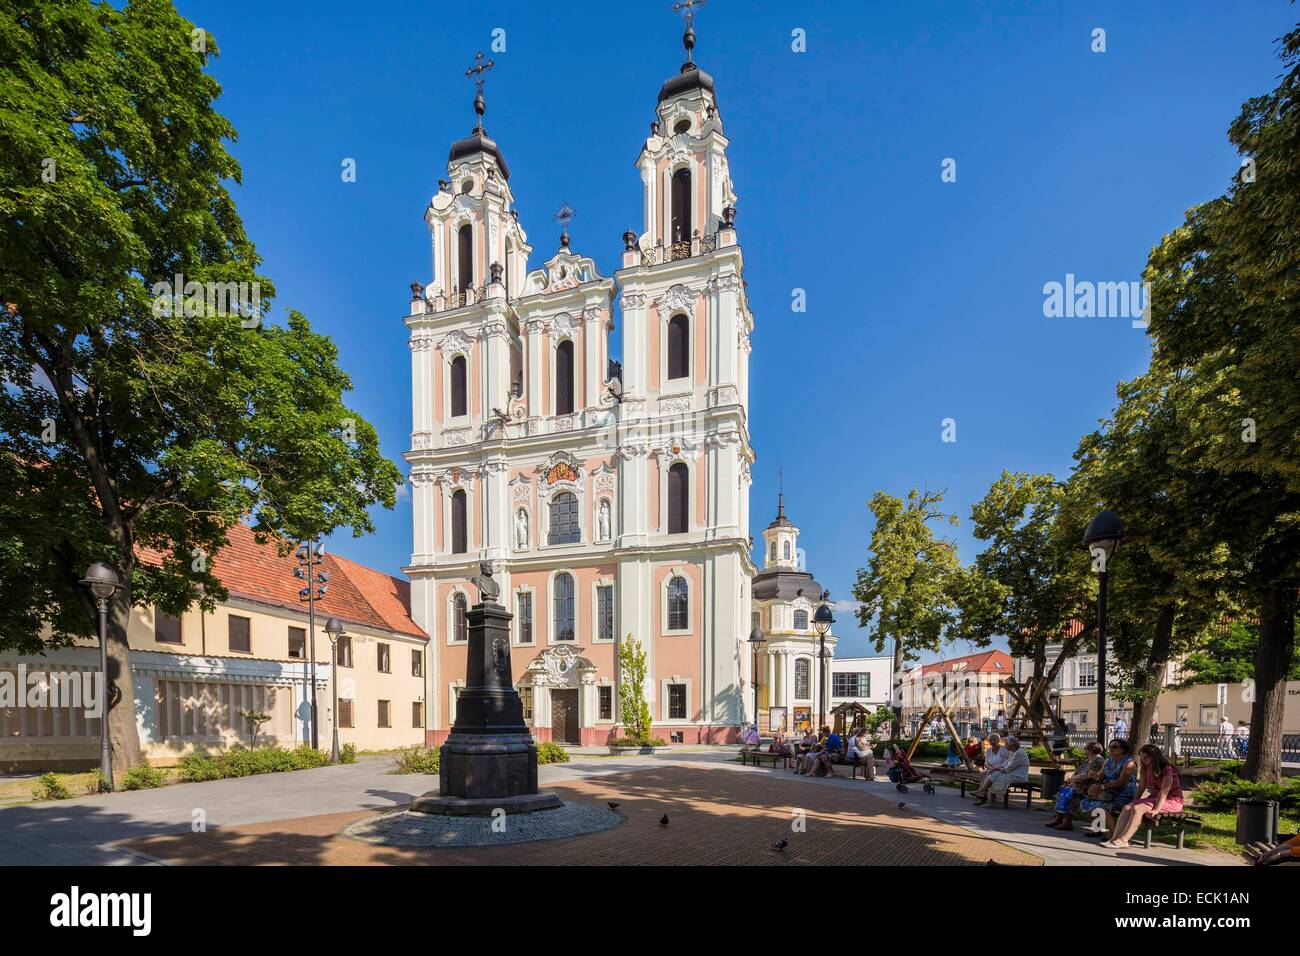 Lithuania (Baltic States), Vilnius, historical center listed as World Heritage by UNESCO, St Catherine Baroque Church transformed into a concert hall and theater, Vilniaus Gatve Stock Photo